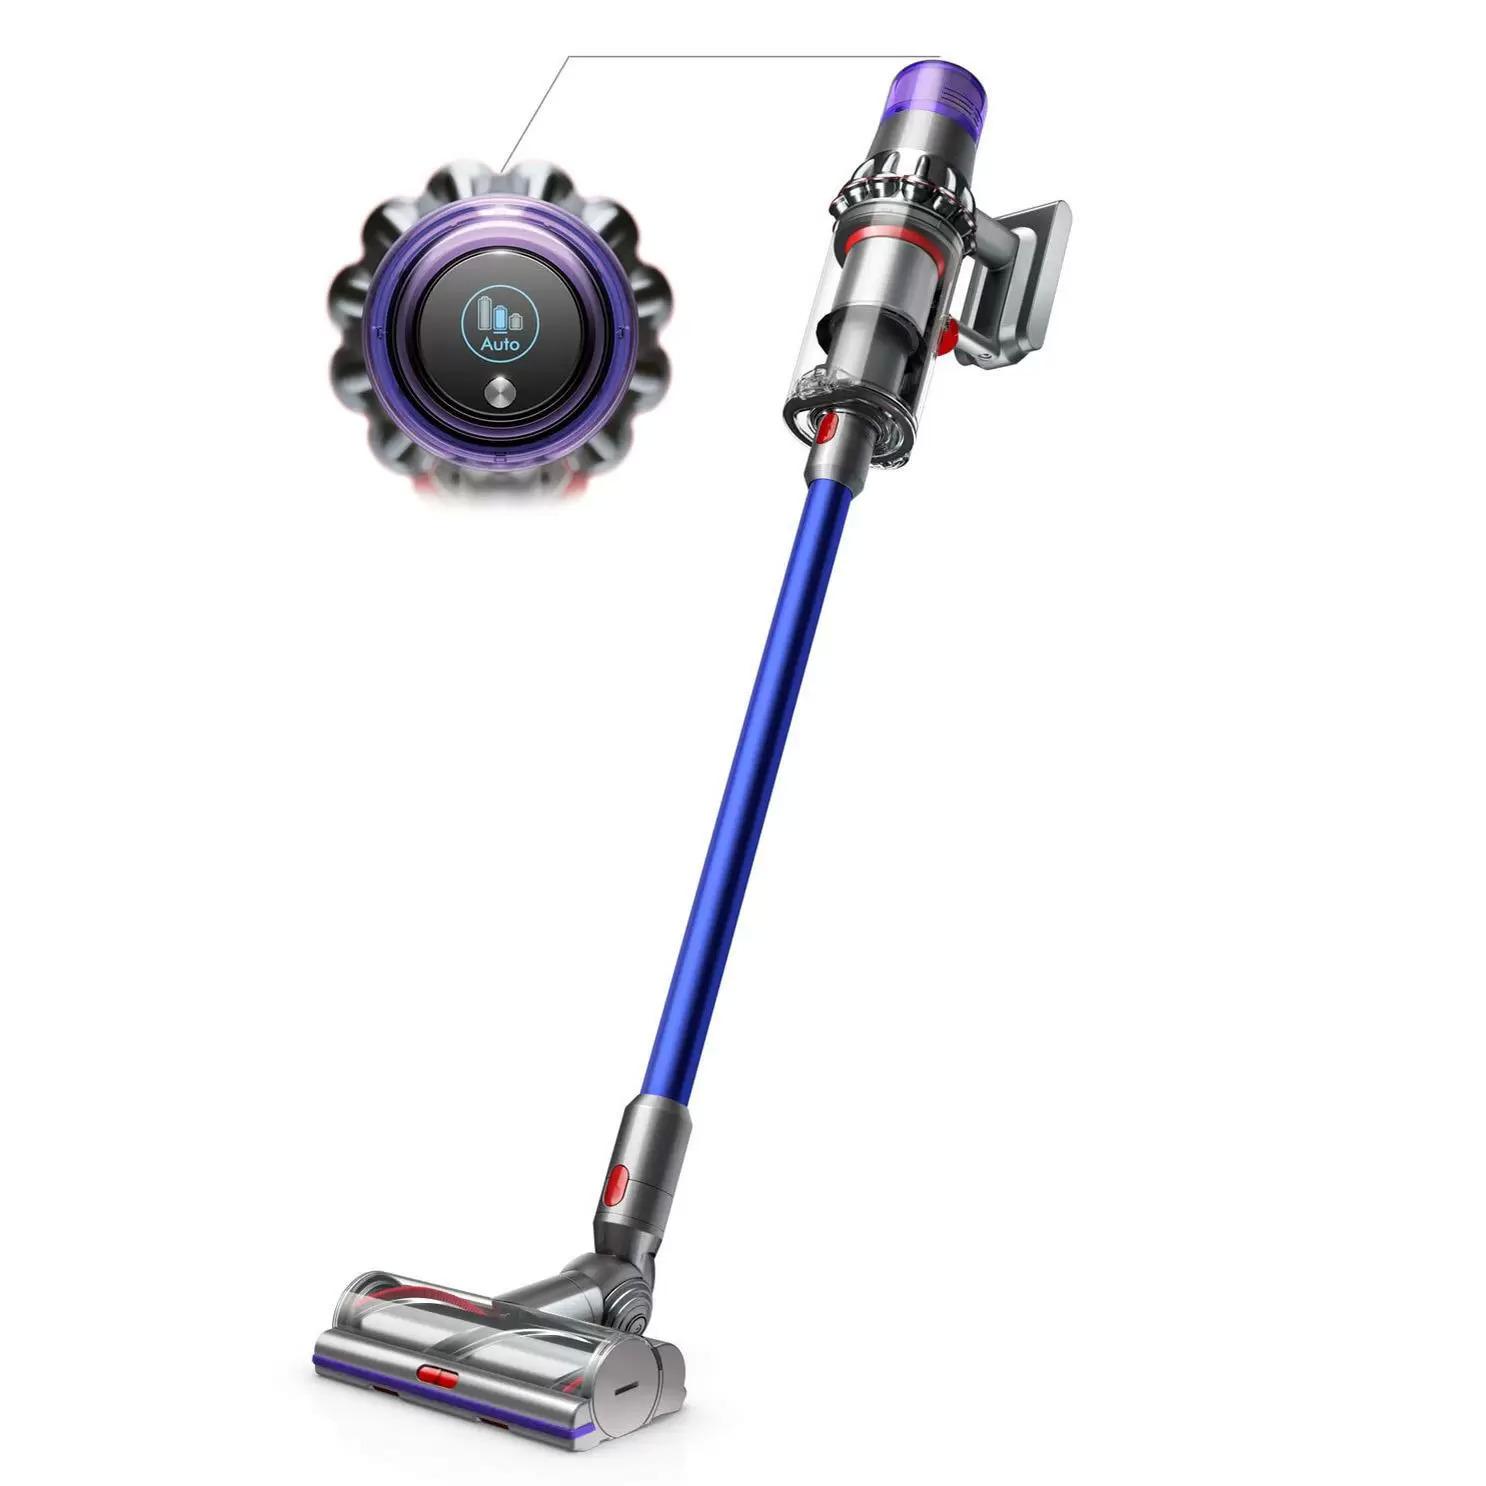 Dyson V11 Torque Drive + Cordless Vacuum for $279.99 Shipped